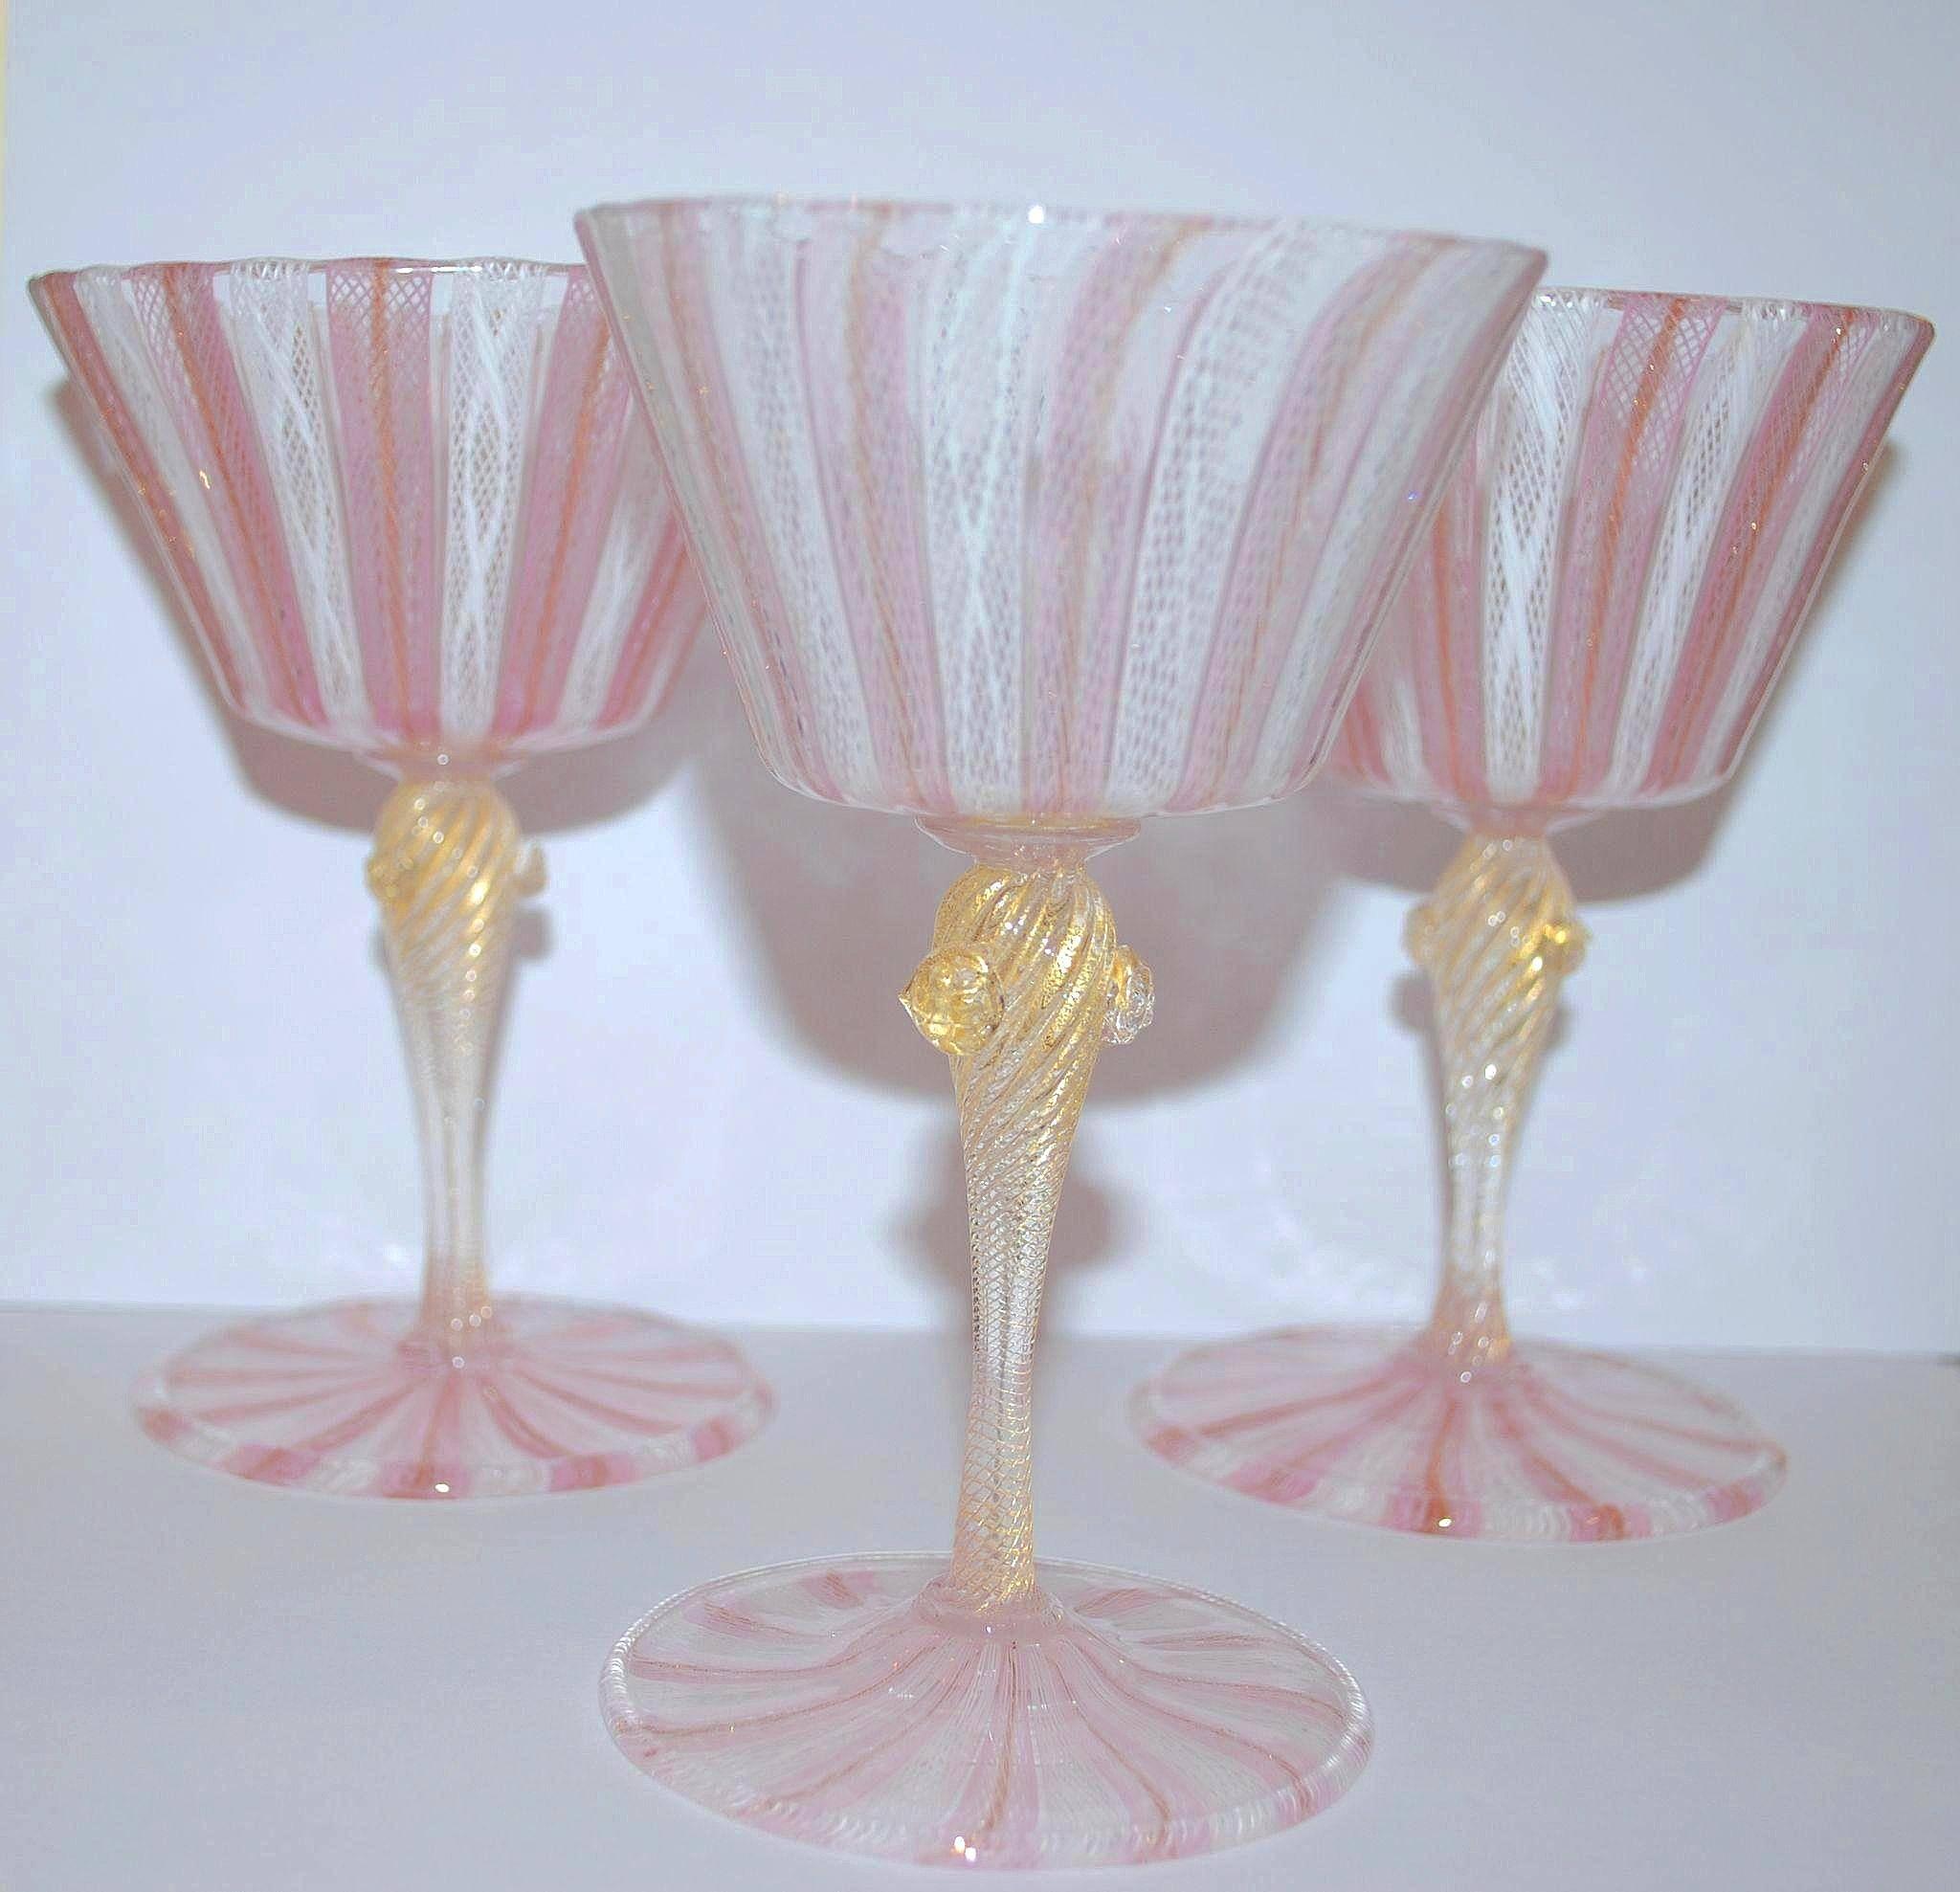 An exquisite set of ten vintage hand blown glass Venetian Murano glasses.

This set features pink, white and clear glass in the latticino design, all radiating out from the central point. Gold flakes are suspended throughout the stem and parts of